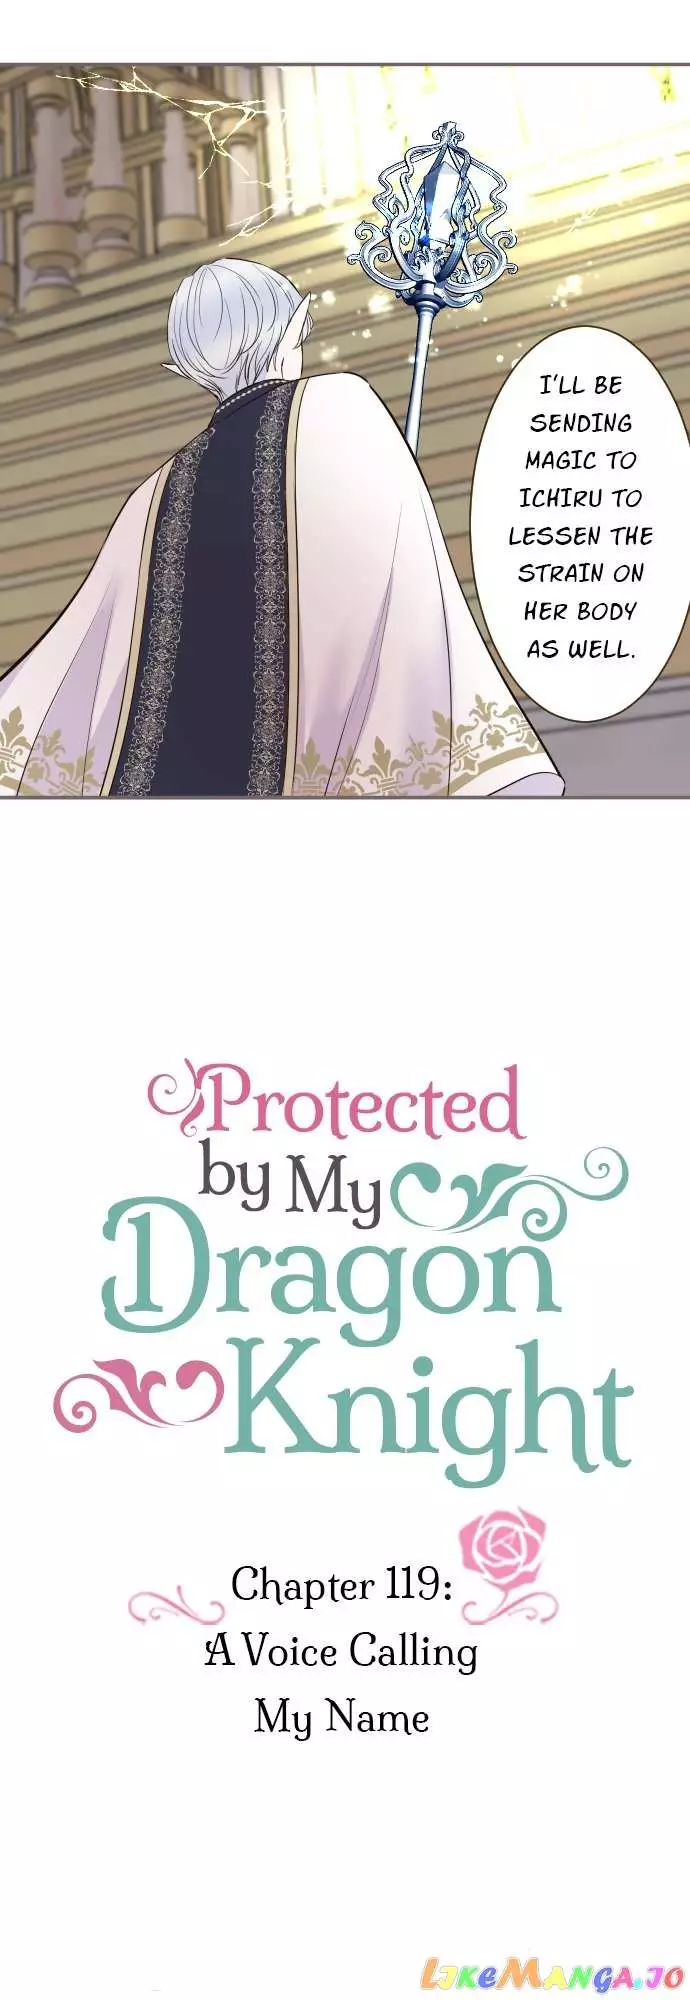 Protected By My Dragon Knight - 119 page 3-4a5da012